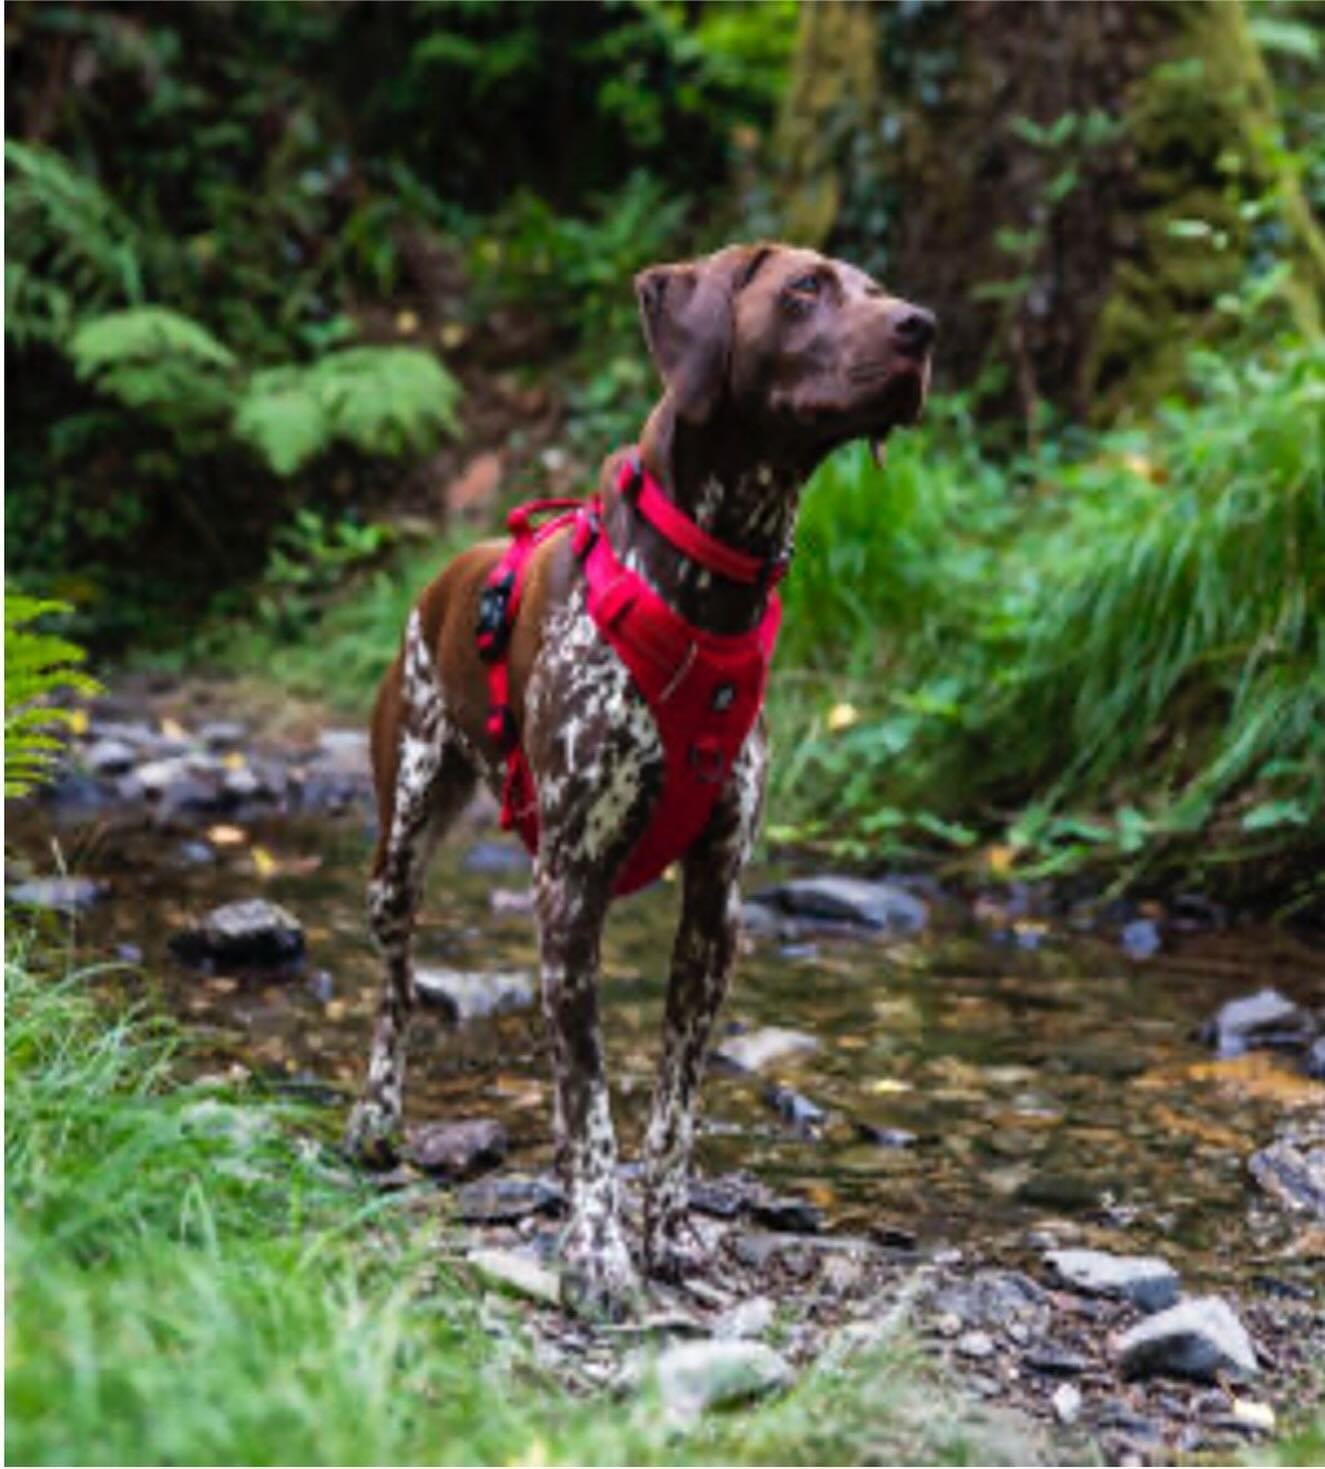 🐶Upgrade your dog&rsquo;s walking experience with these durable and stylish dog harnesses. 🐾Pawshtails harness features multifunctional design for you and your dog:
🐾No pull design, perfect for dogs who pull with no stress on your dog&rsquo;s neck